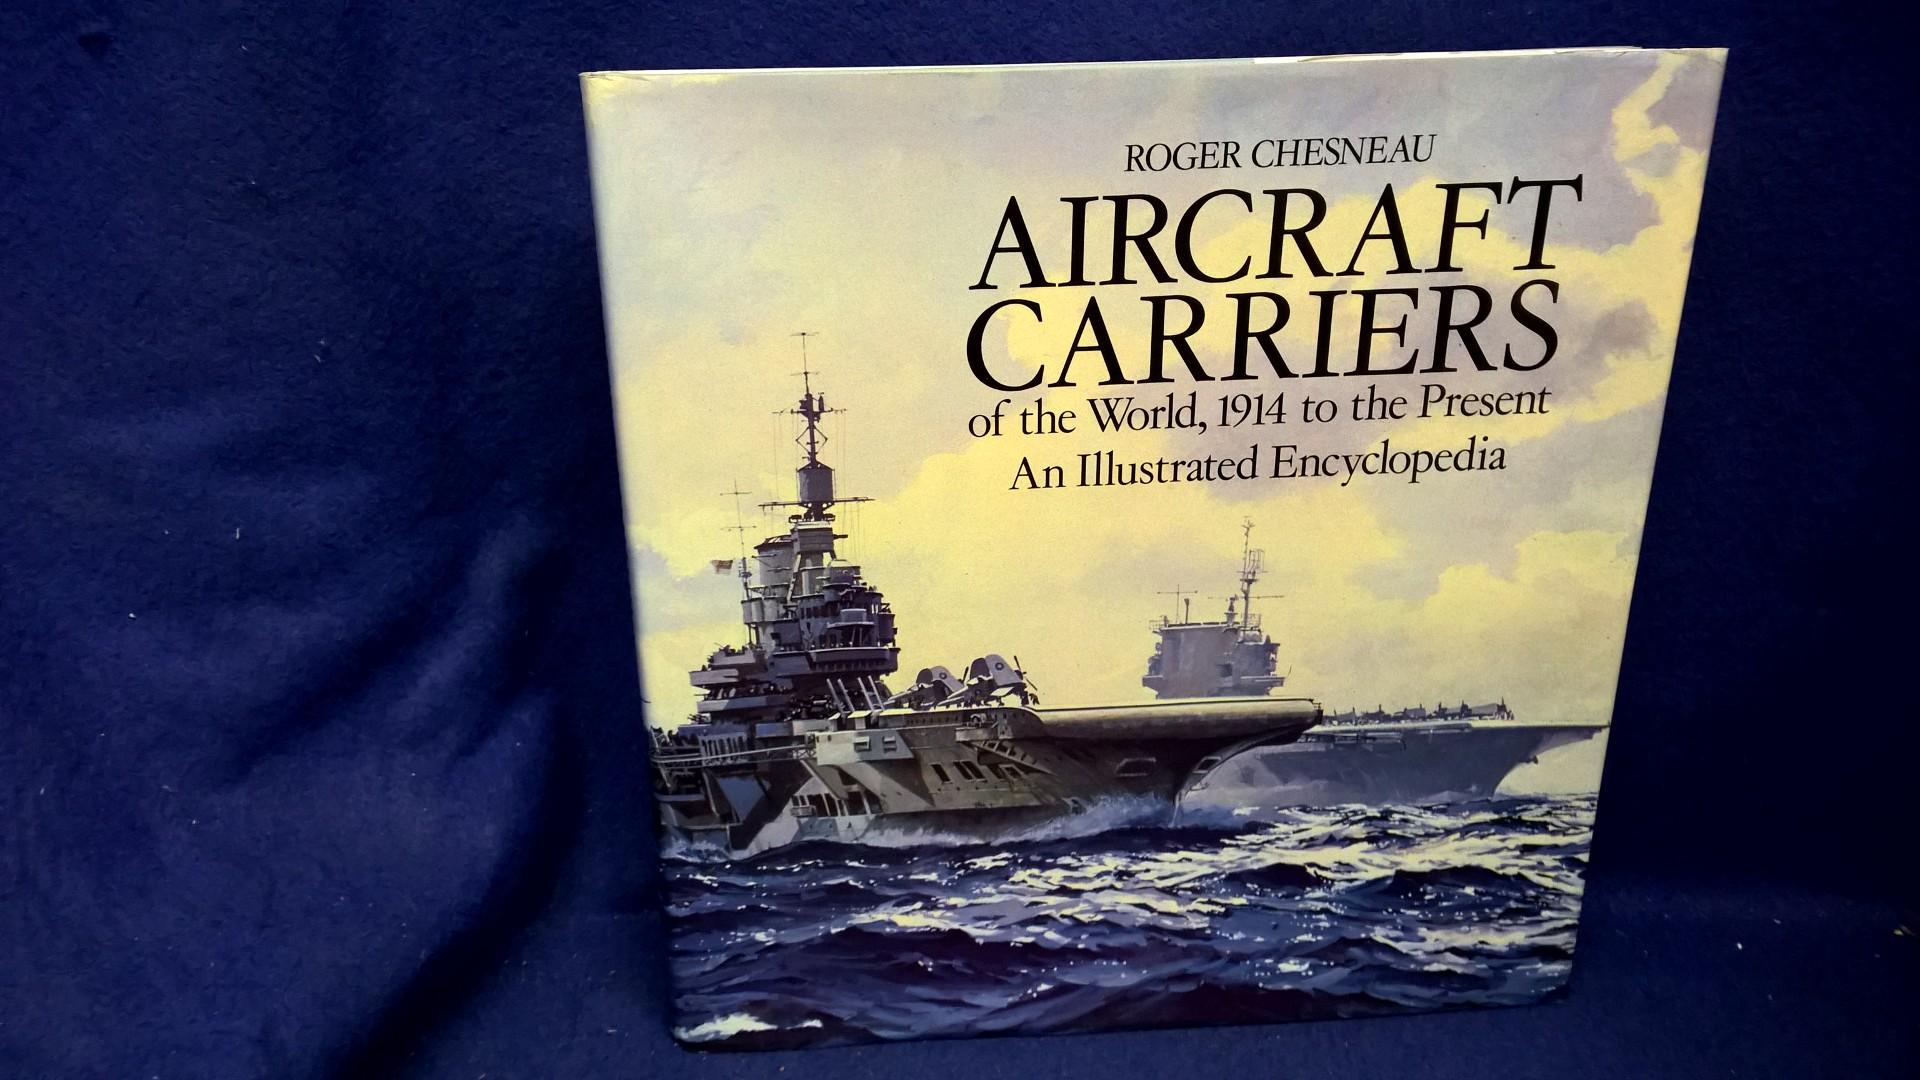 Aircraft Carriers of the World, 1914 to the Present. An Illustrated Encyclopaedia.